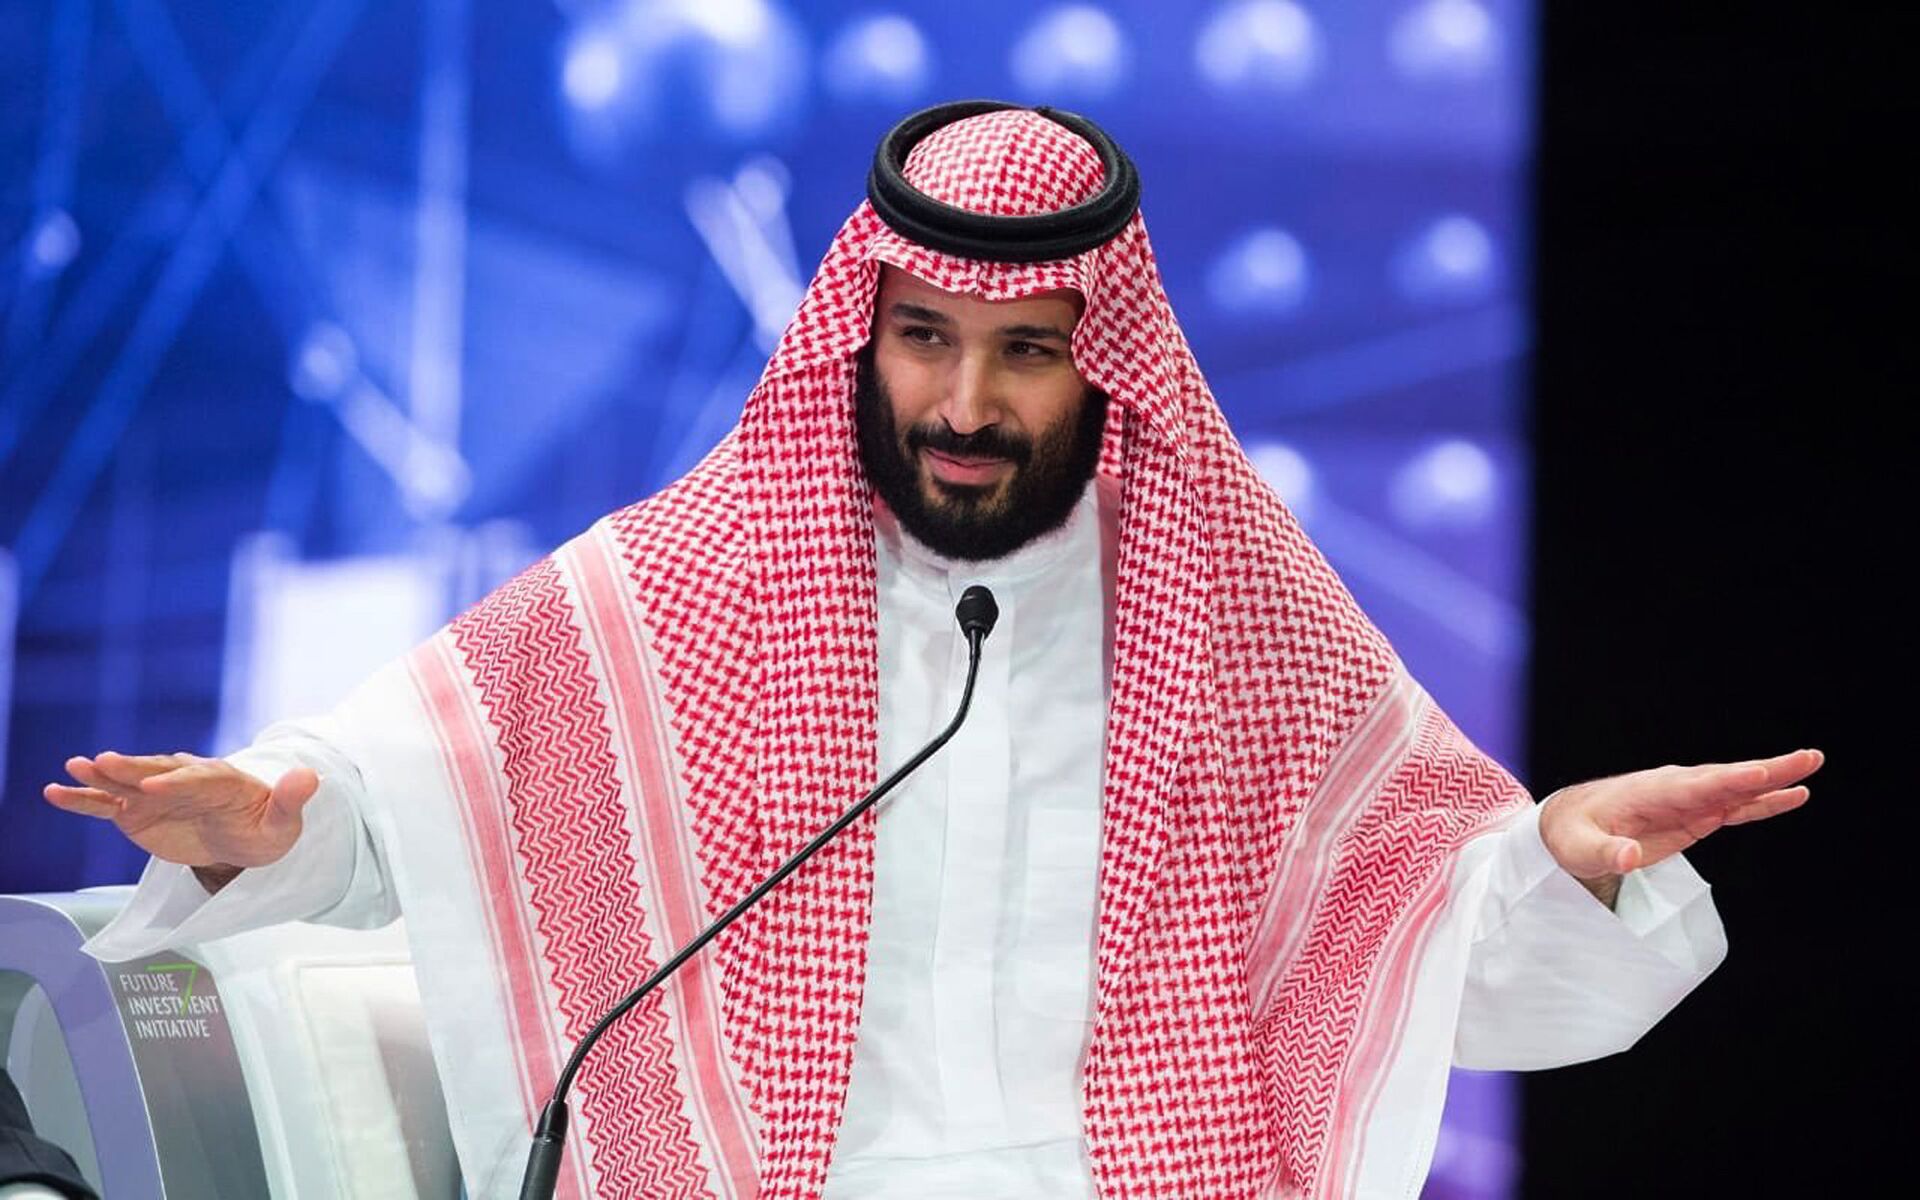 In this photo released by Saudi Press Agency, SPA, Saudi Crown Prince, Mohammed bin Salman addresses the Future Investment Initiative conference, in Riyadh, Saudi Arabia, Wednesday, Oct. 24, 2018 - Sputnik International, 1920, 08.07.2022